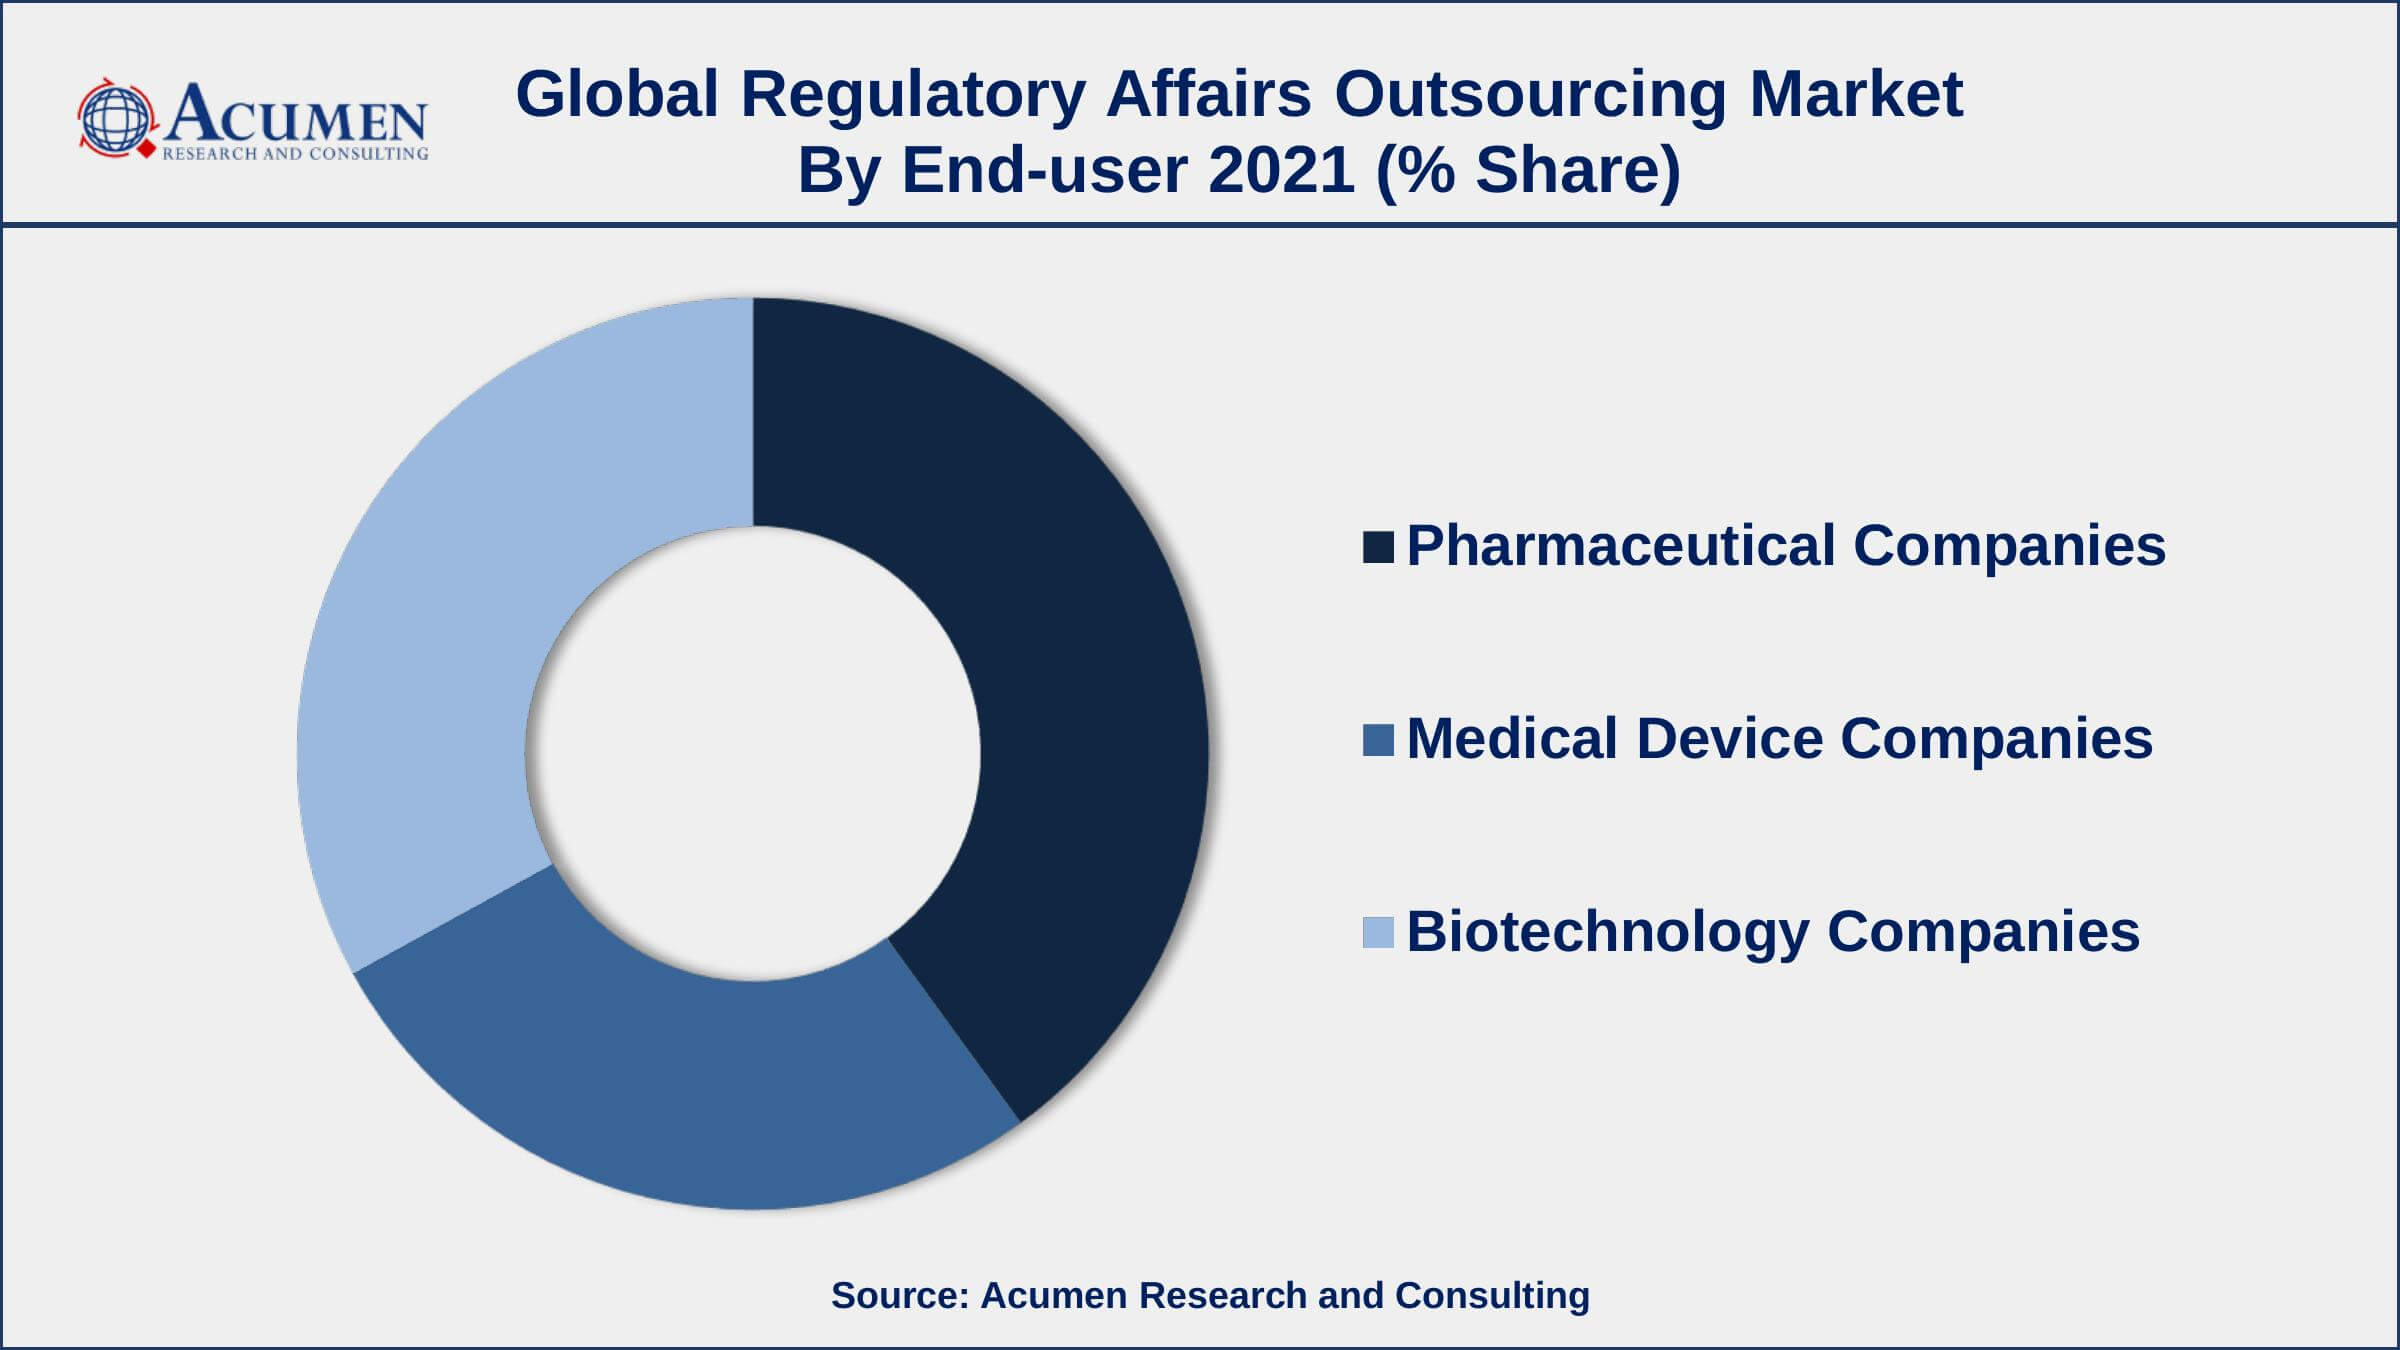 Among end-user, pharmaceutical companies engaged more than 41% of the total market share